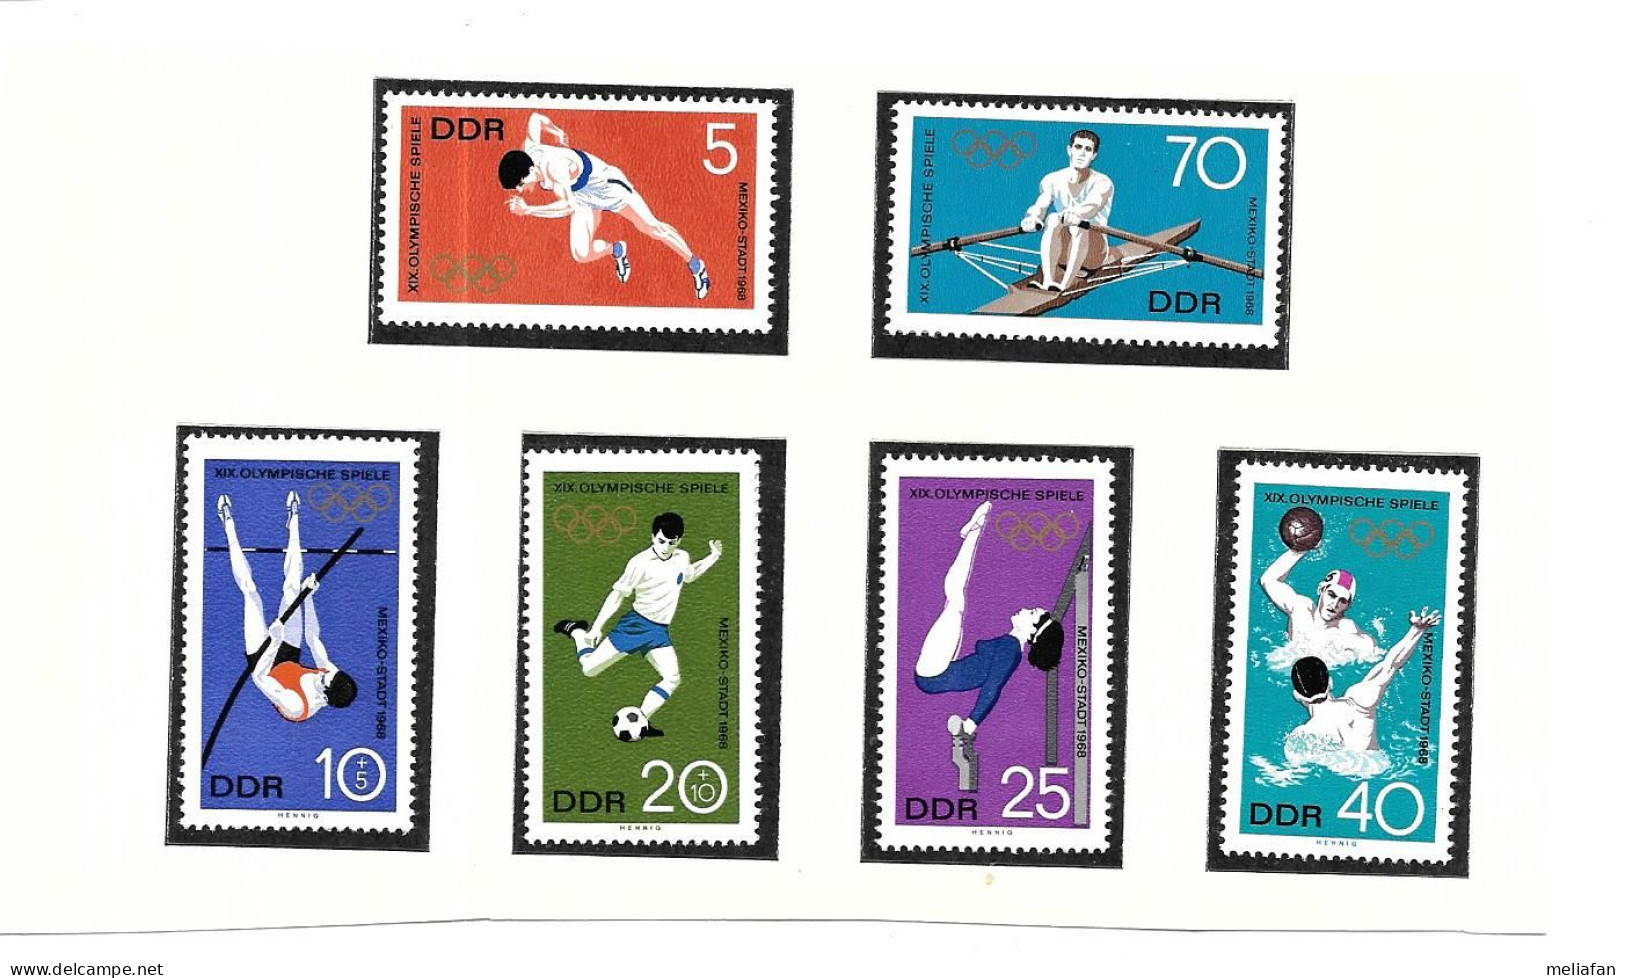 DF96 - TIMBRES POSTE DDR - JEUX OLYMPIQUES MEXICO - AVIRON - FOOTBALL - WATER POLO - GYMNASTIQUE - ATHLETISME - Zomer 1968: Mexico-City